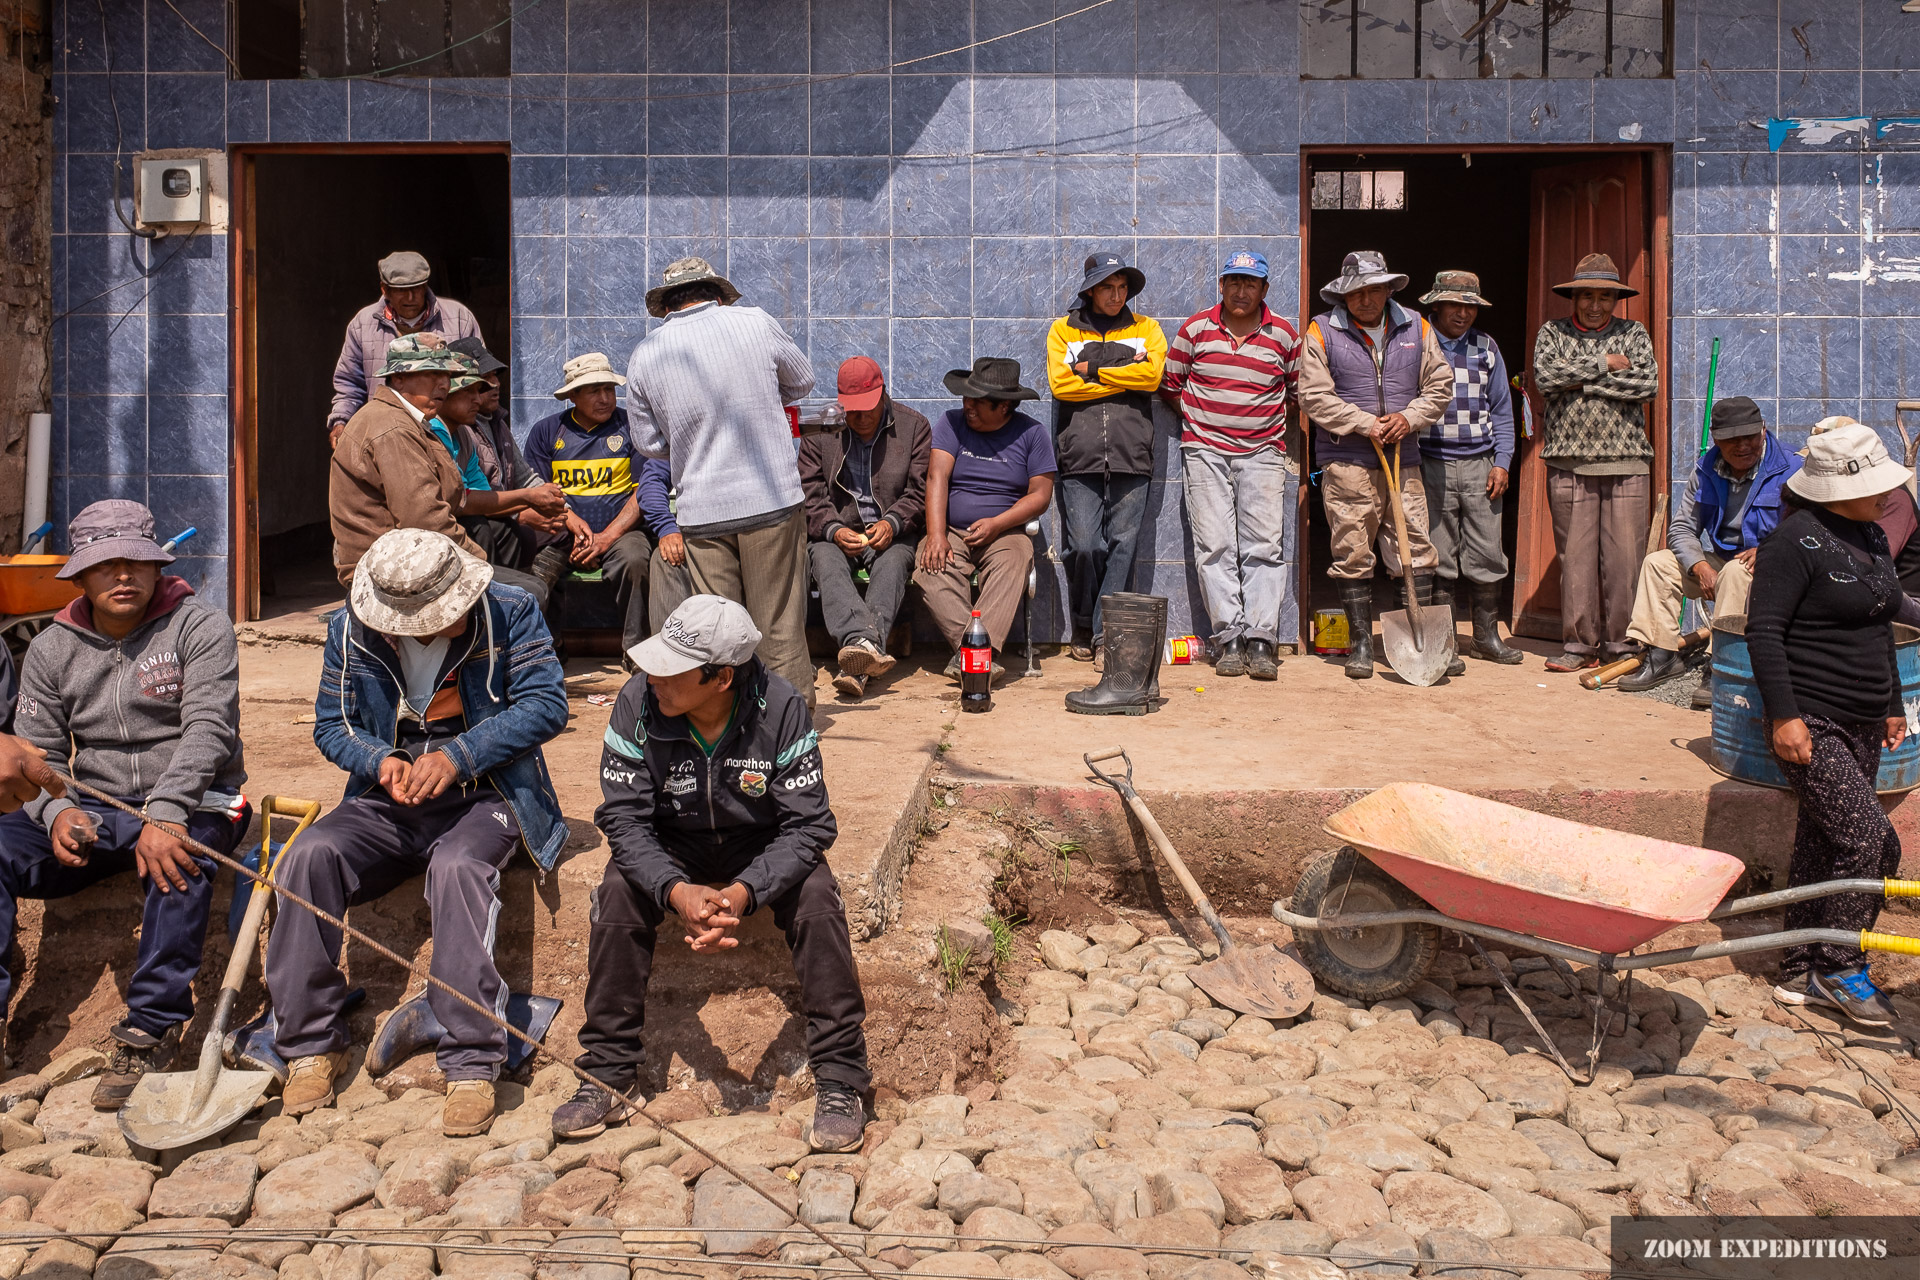 workers in Bolivia at Titicaca Lake